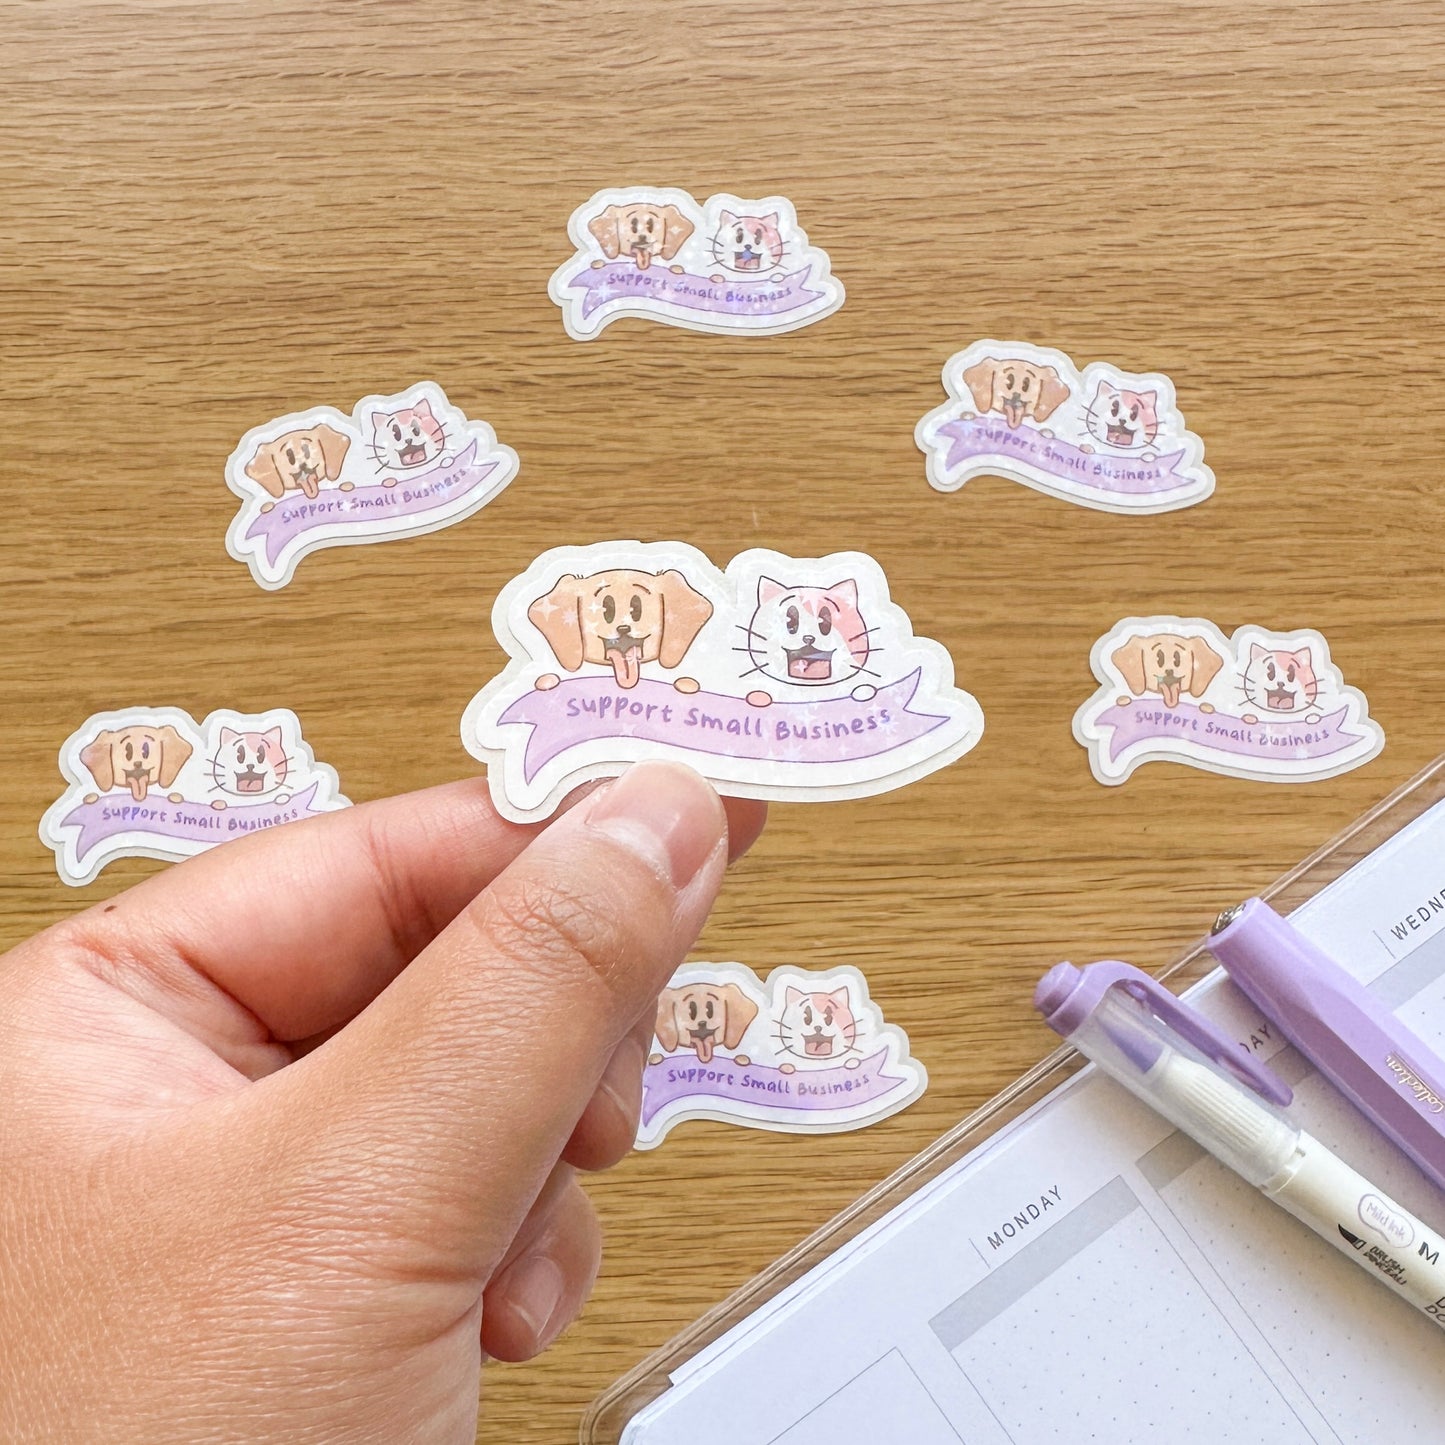 Support Small Business - Joey and Cake Holo Die Cut Stickers